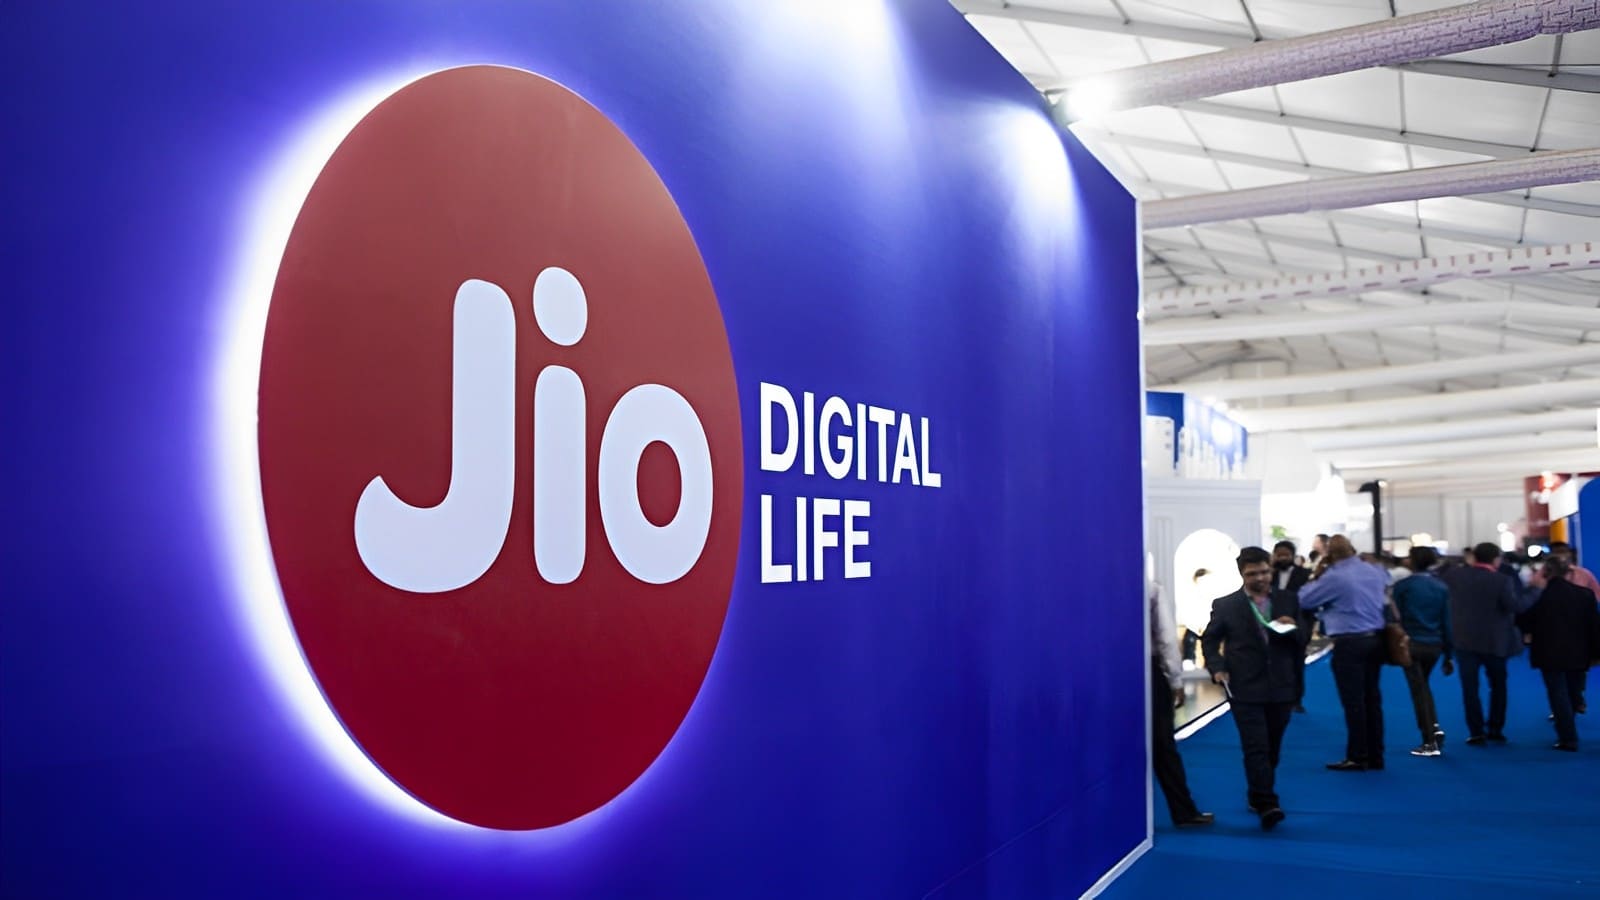 Reliance Jio's Radisys acquires Mimosa Networks in $60M deal